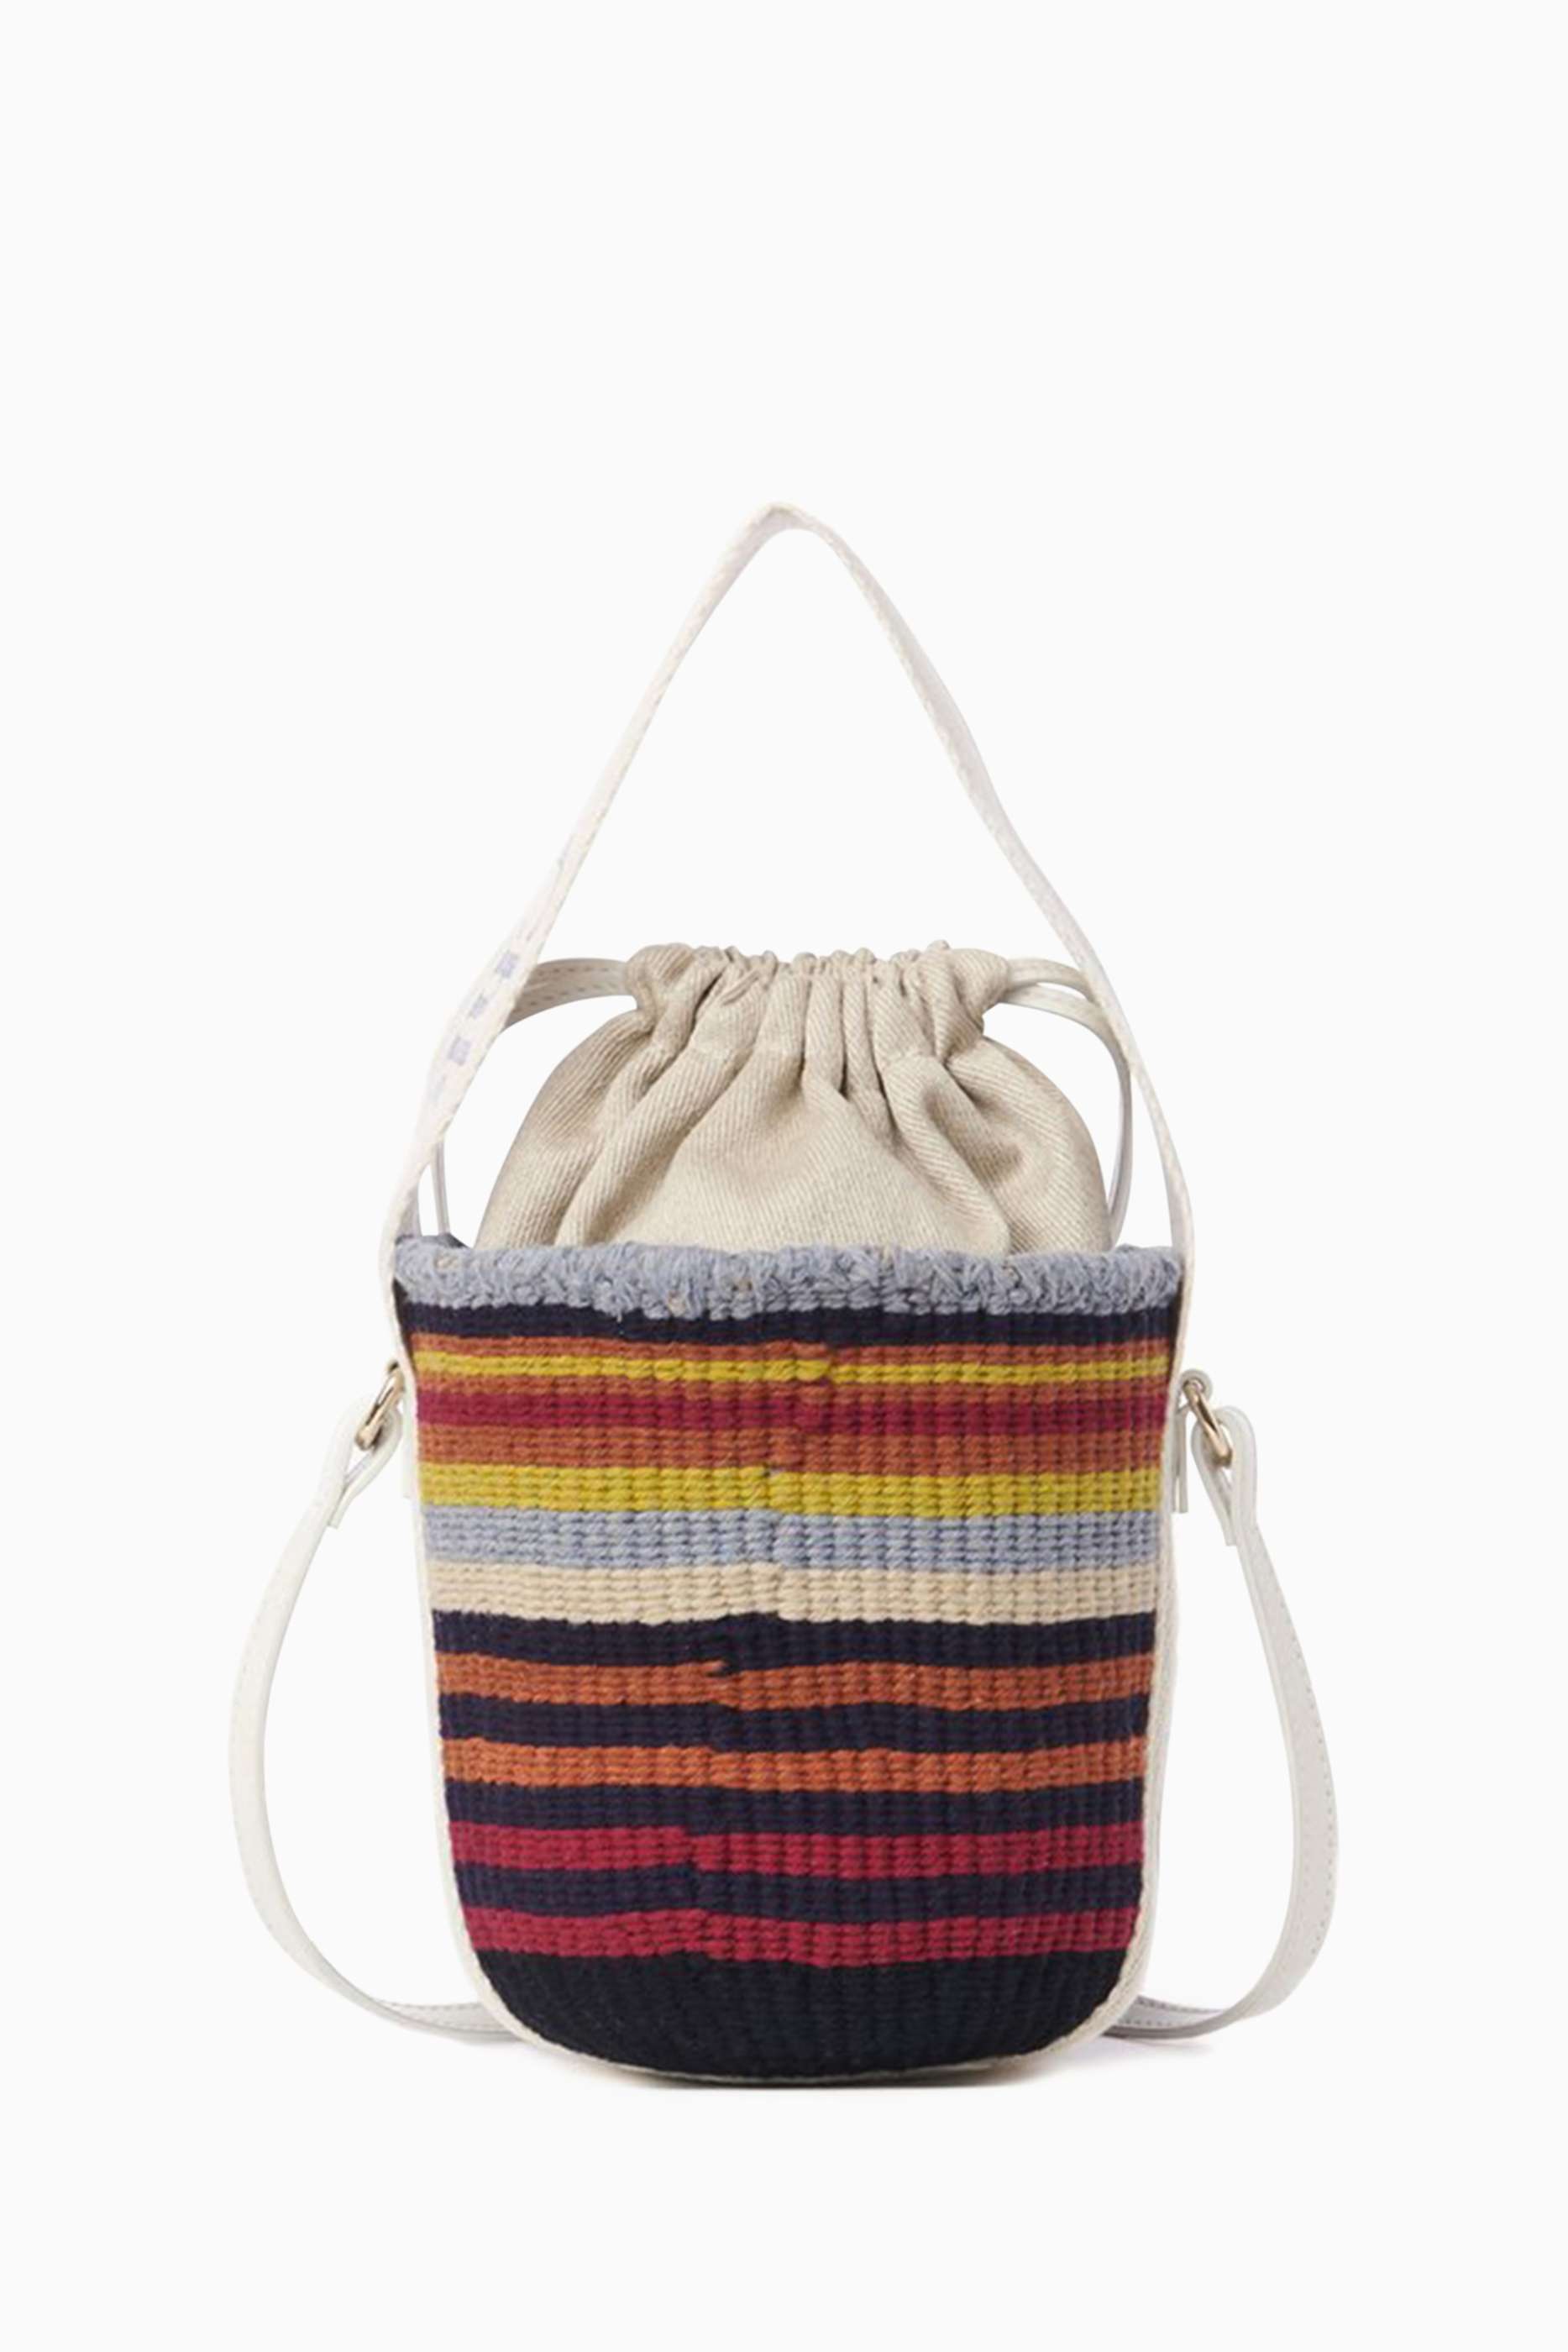 shop-chloe-small-woody-bucket-bag-in-recycled-wool-knit-for-women